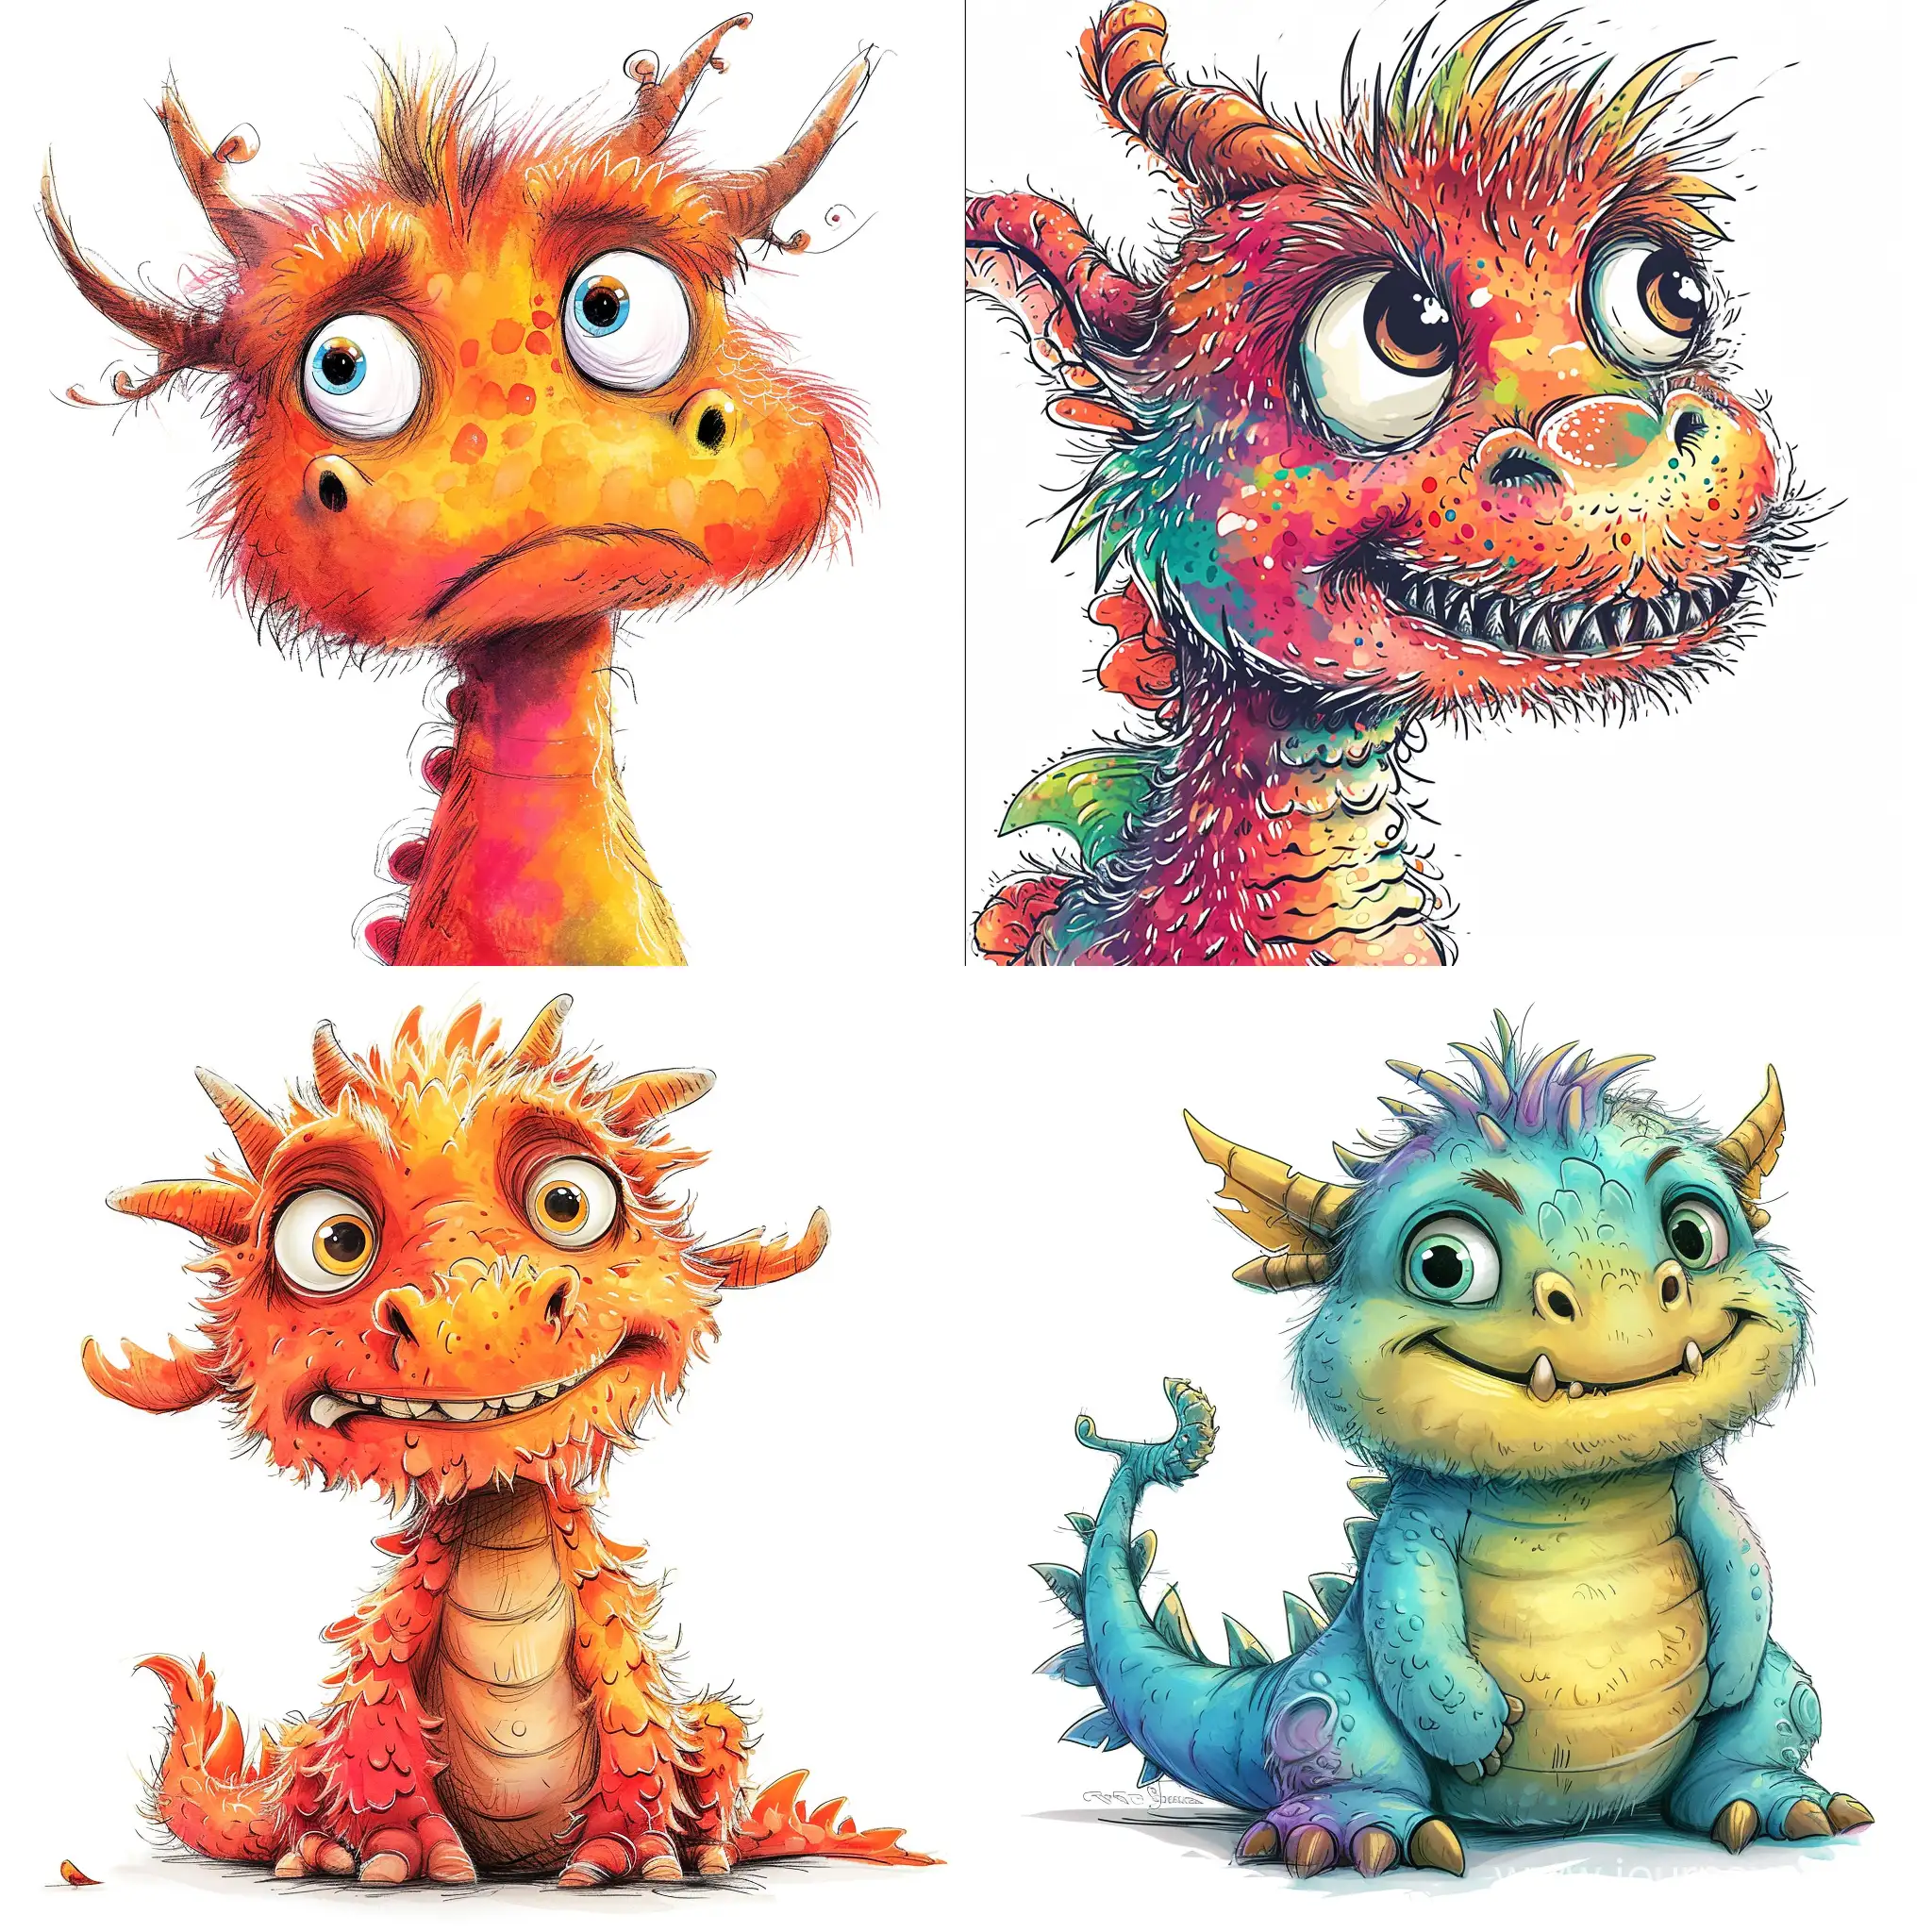 Cute furry dragon character, many expressions, chubby, funky, swag, close-up, detailed ink illustration, colorful, pixar, isolated on white background, in the style of Frank and Dr. Seuss - Stylized 750